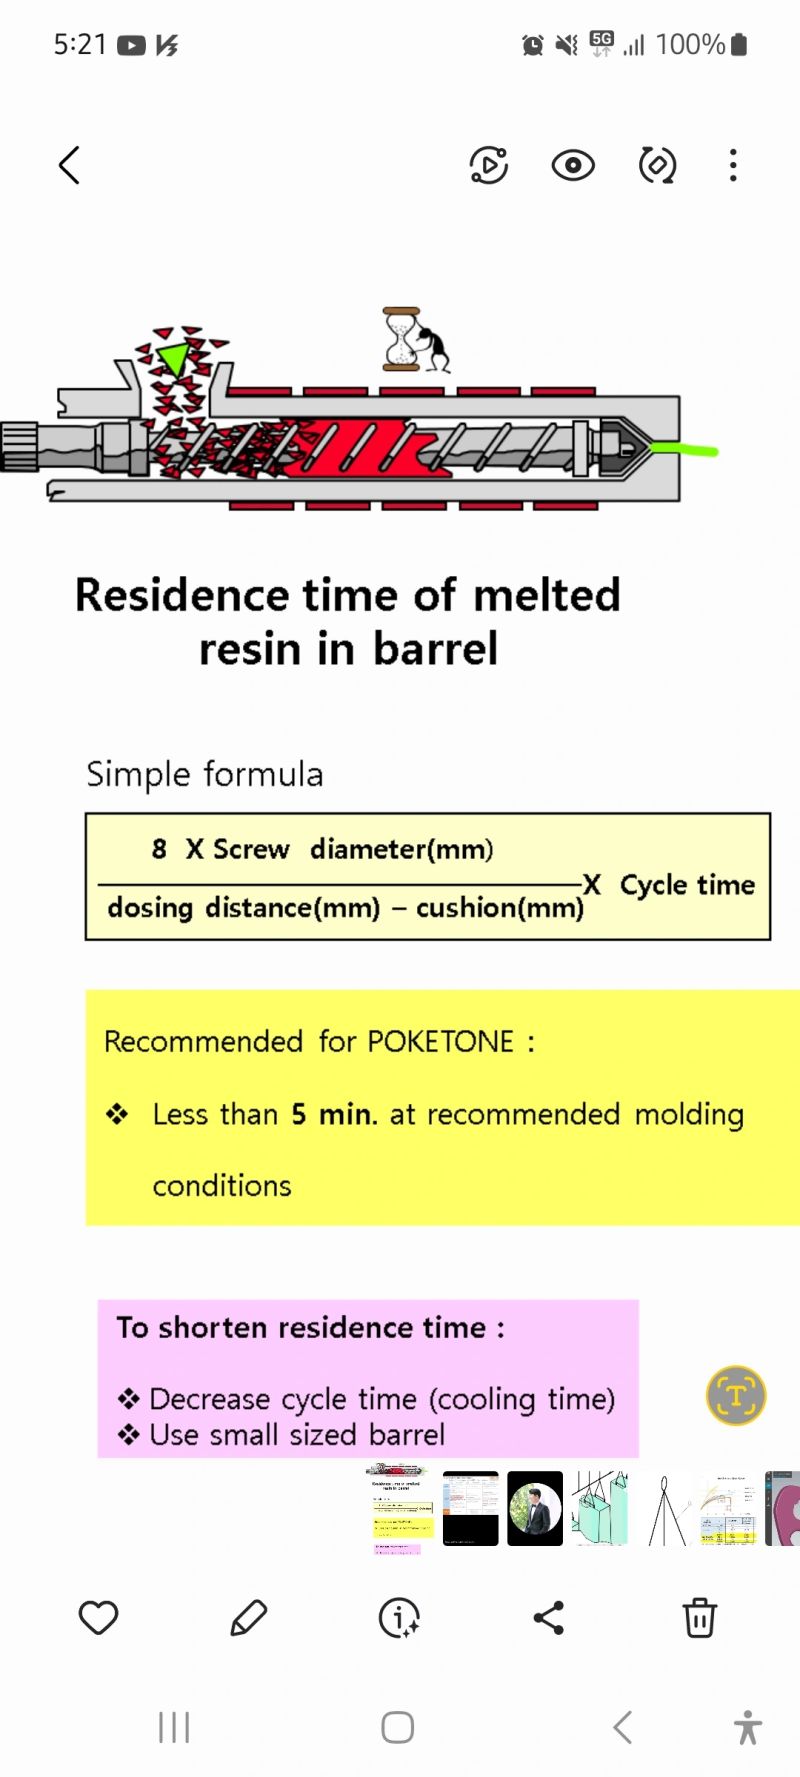 Jaeho Jung on LinkedIn: if you are Poketone injection molder or are to  consider to inject…